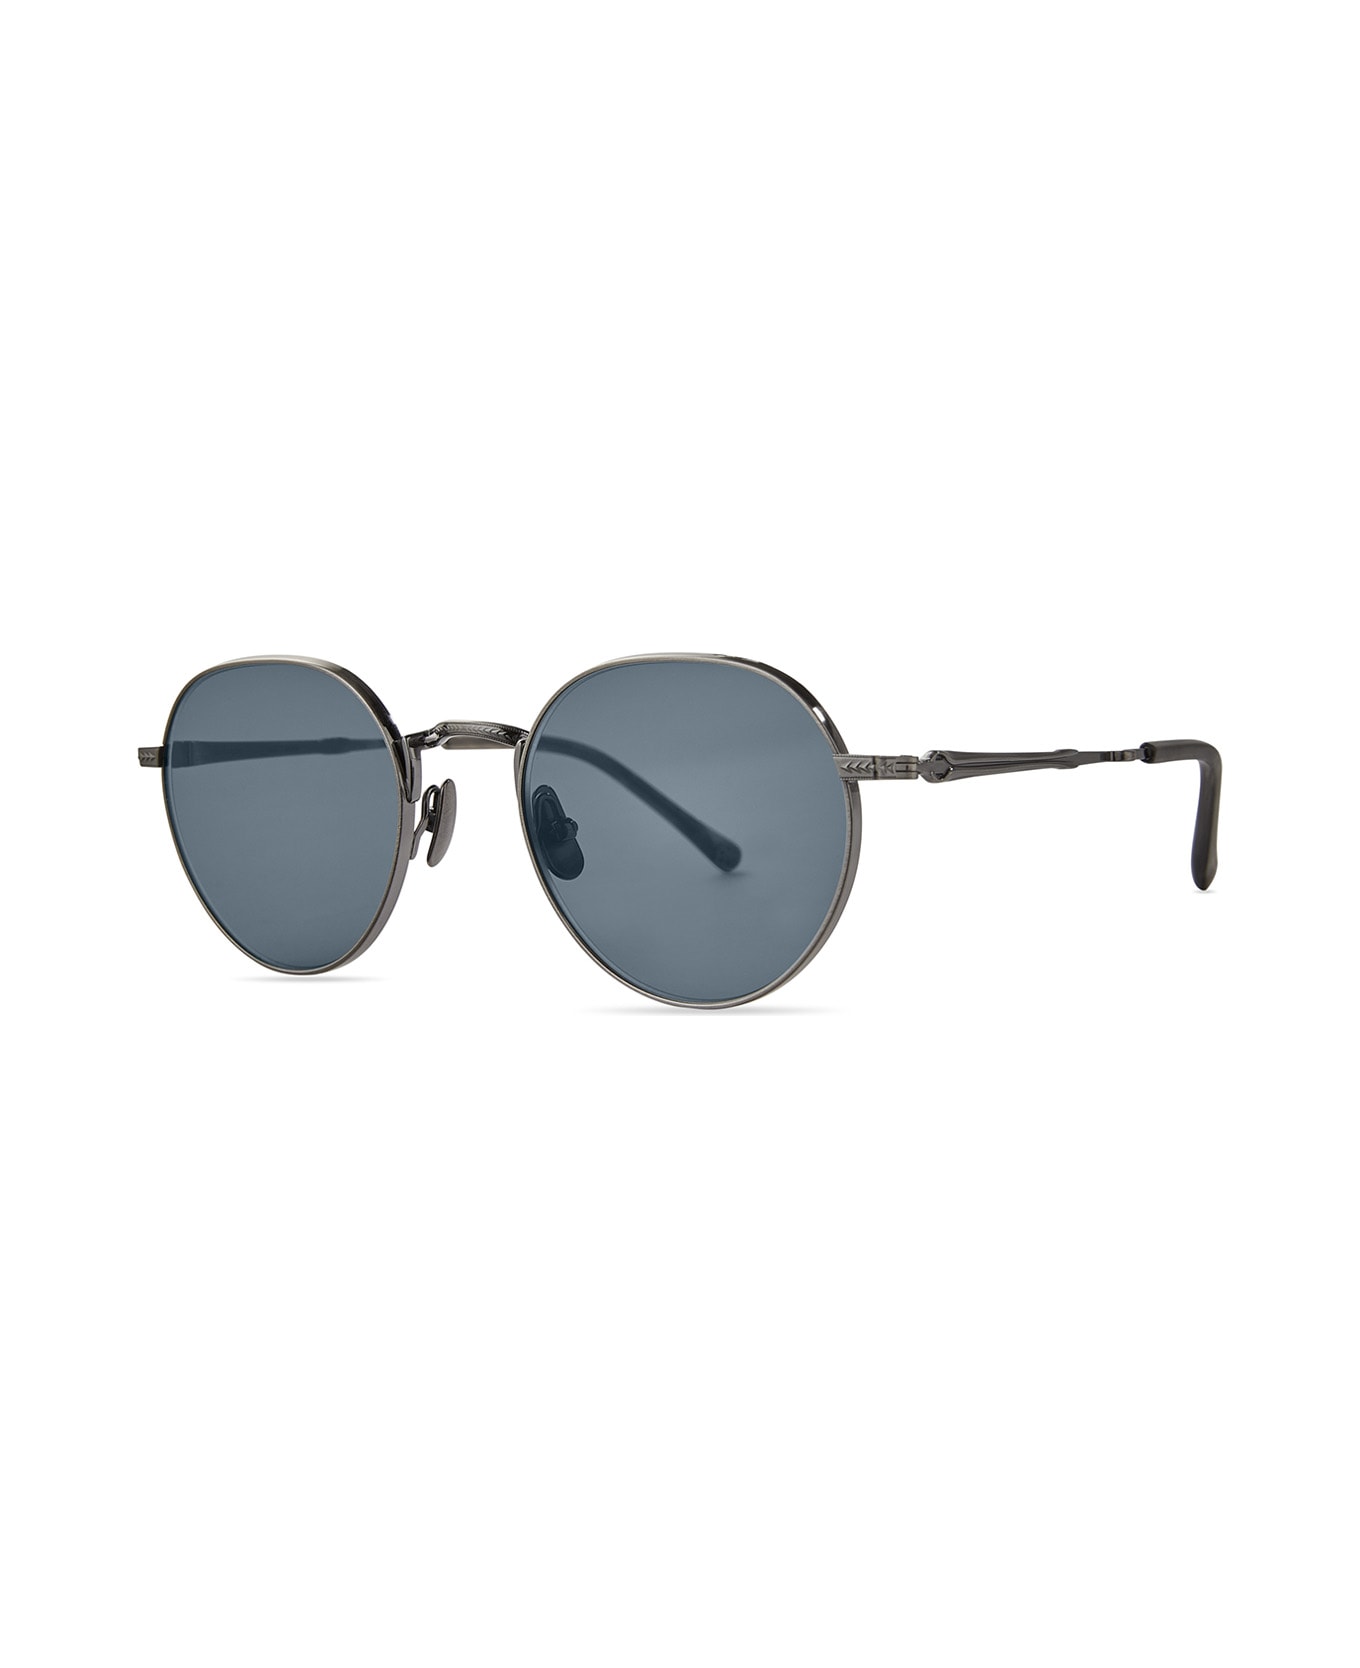 Mr. Leight Hachi S Pewter-matte Coldwater/semi-flat Presidential Blue Sunglasses - Pewter-Matte Coldwater/Semi-Flat Presidential Blue